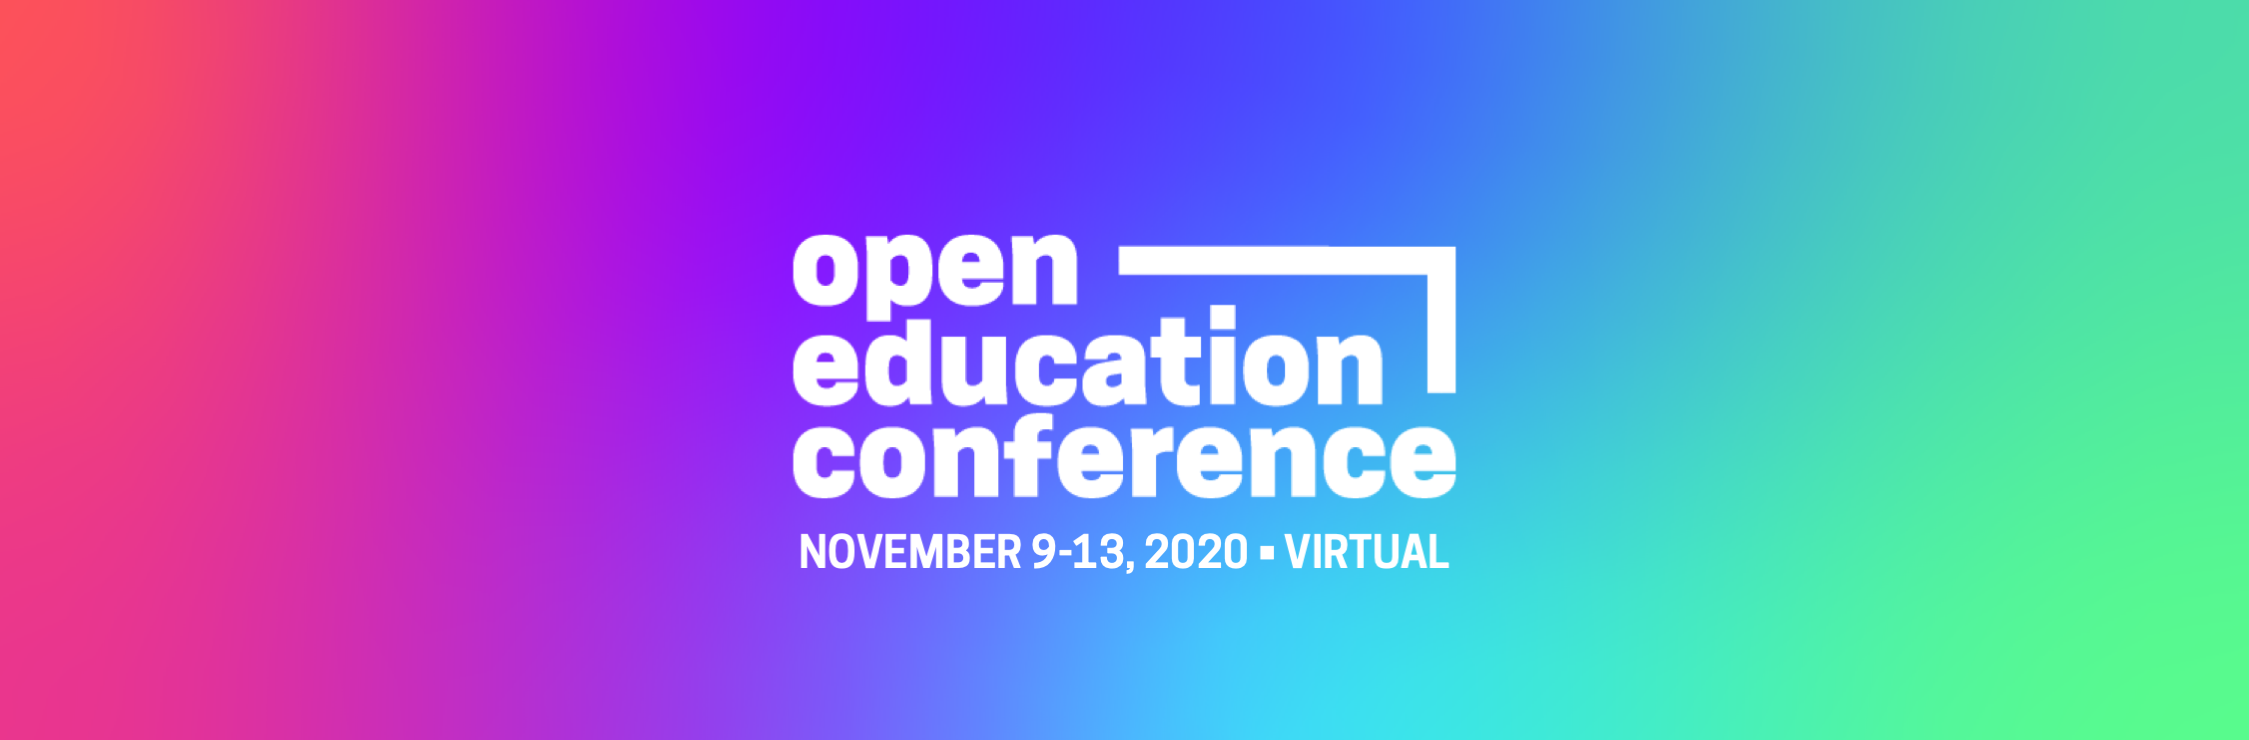 OpenEd20 Conference logo